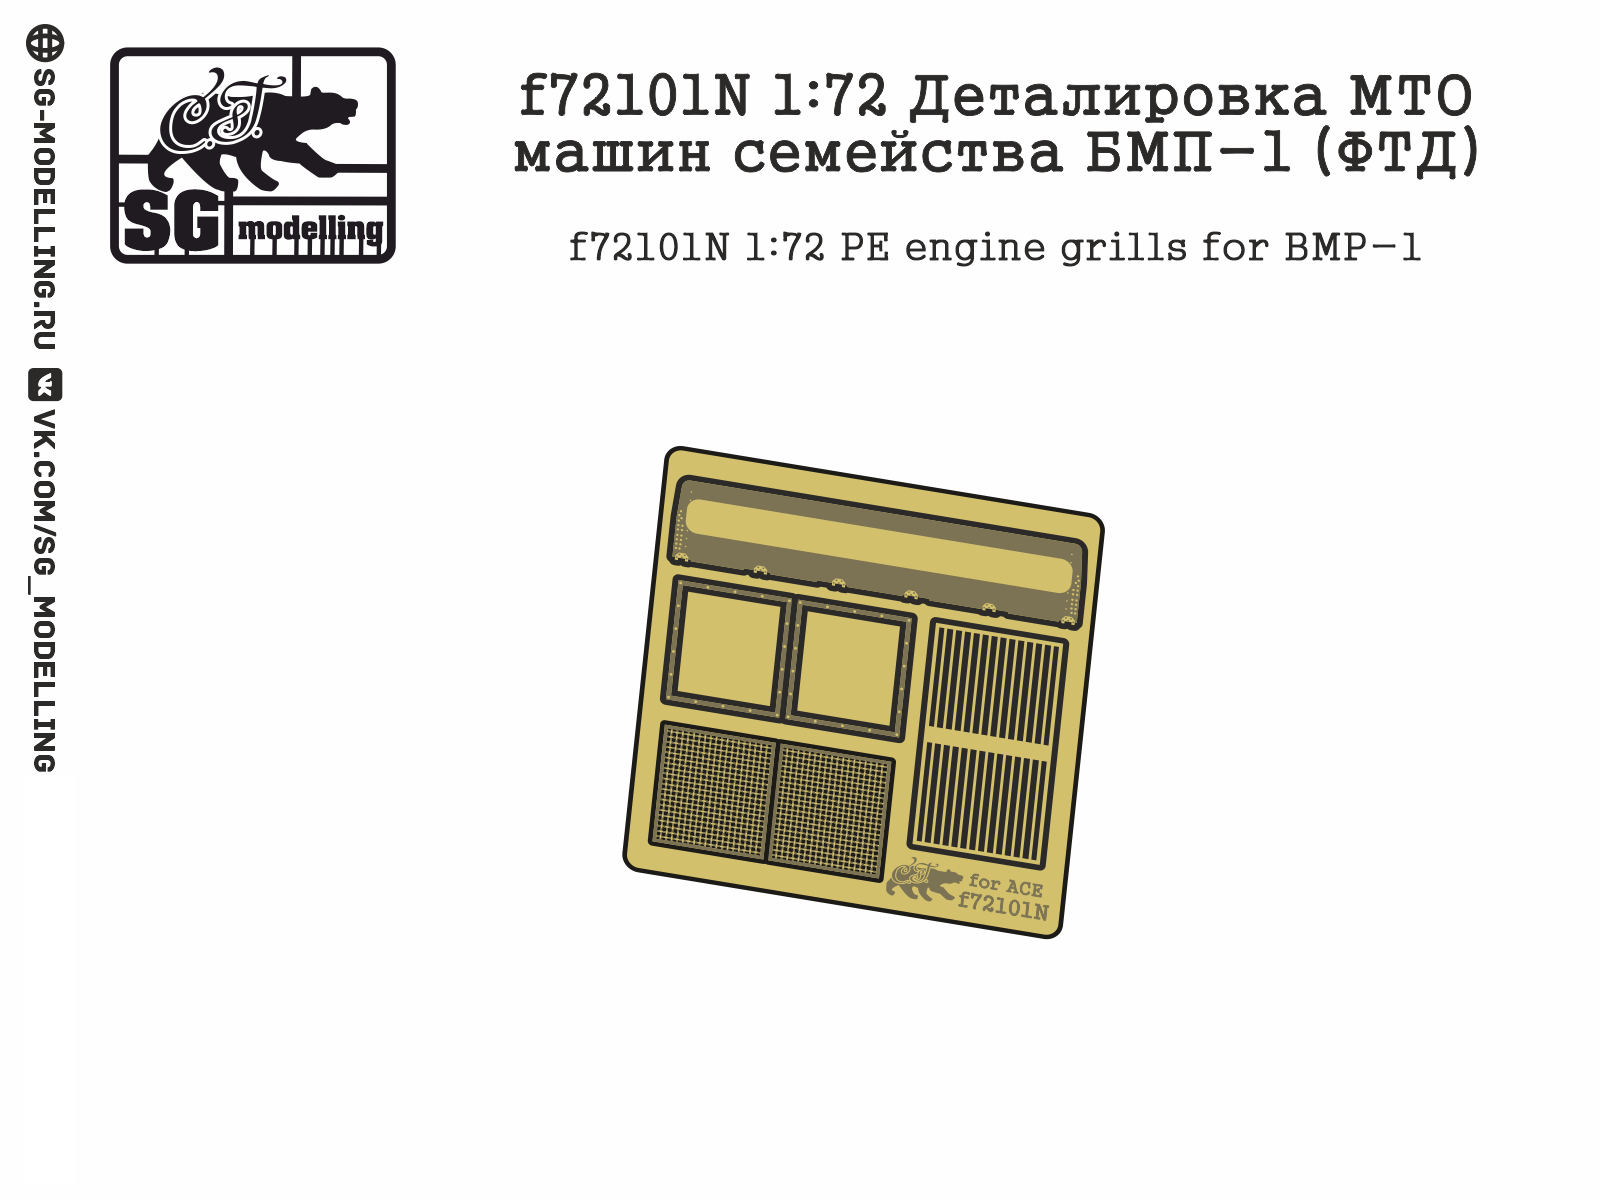 F72101N 1:72 Detailing MTO Machines of the BMP-1 family (FTD) - imodeller.store